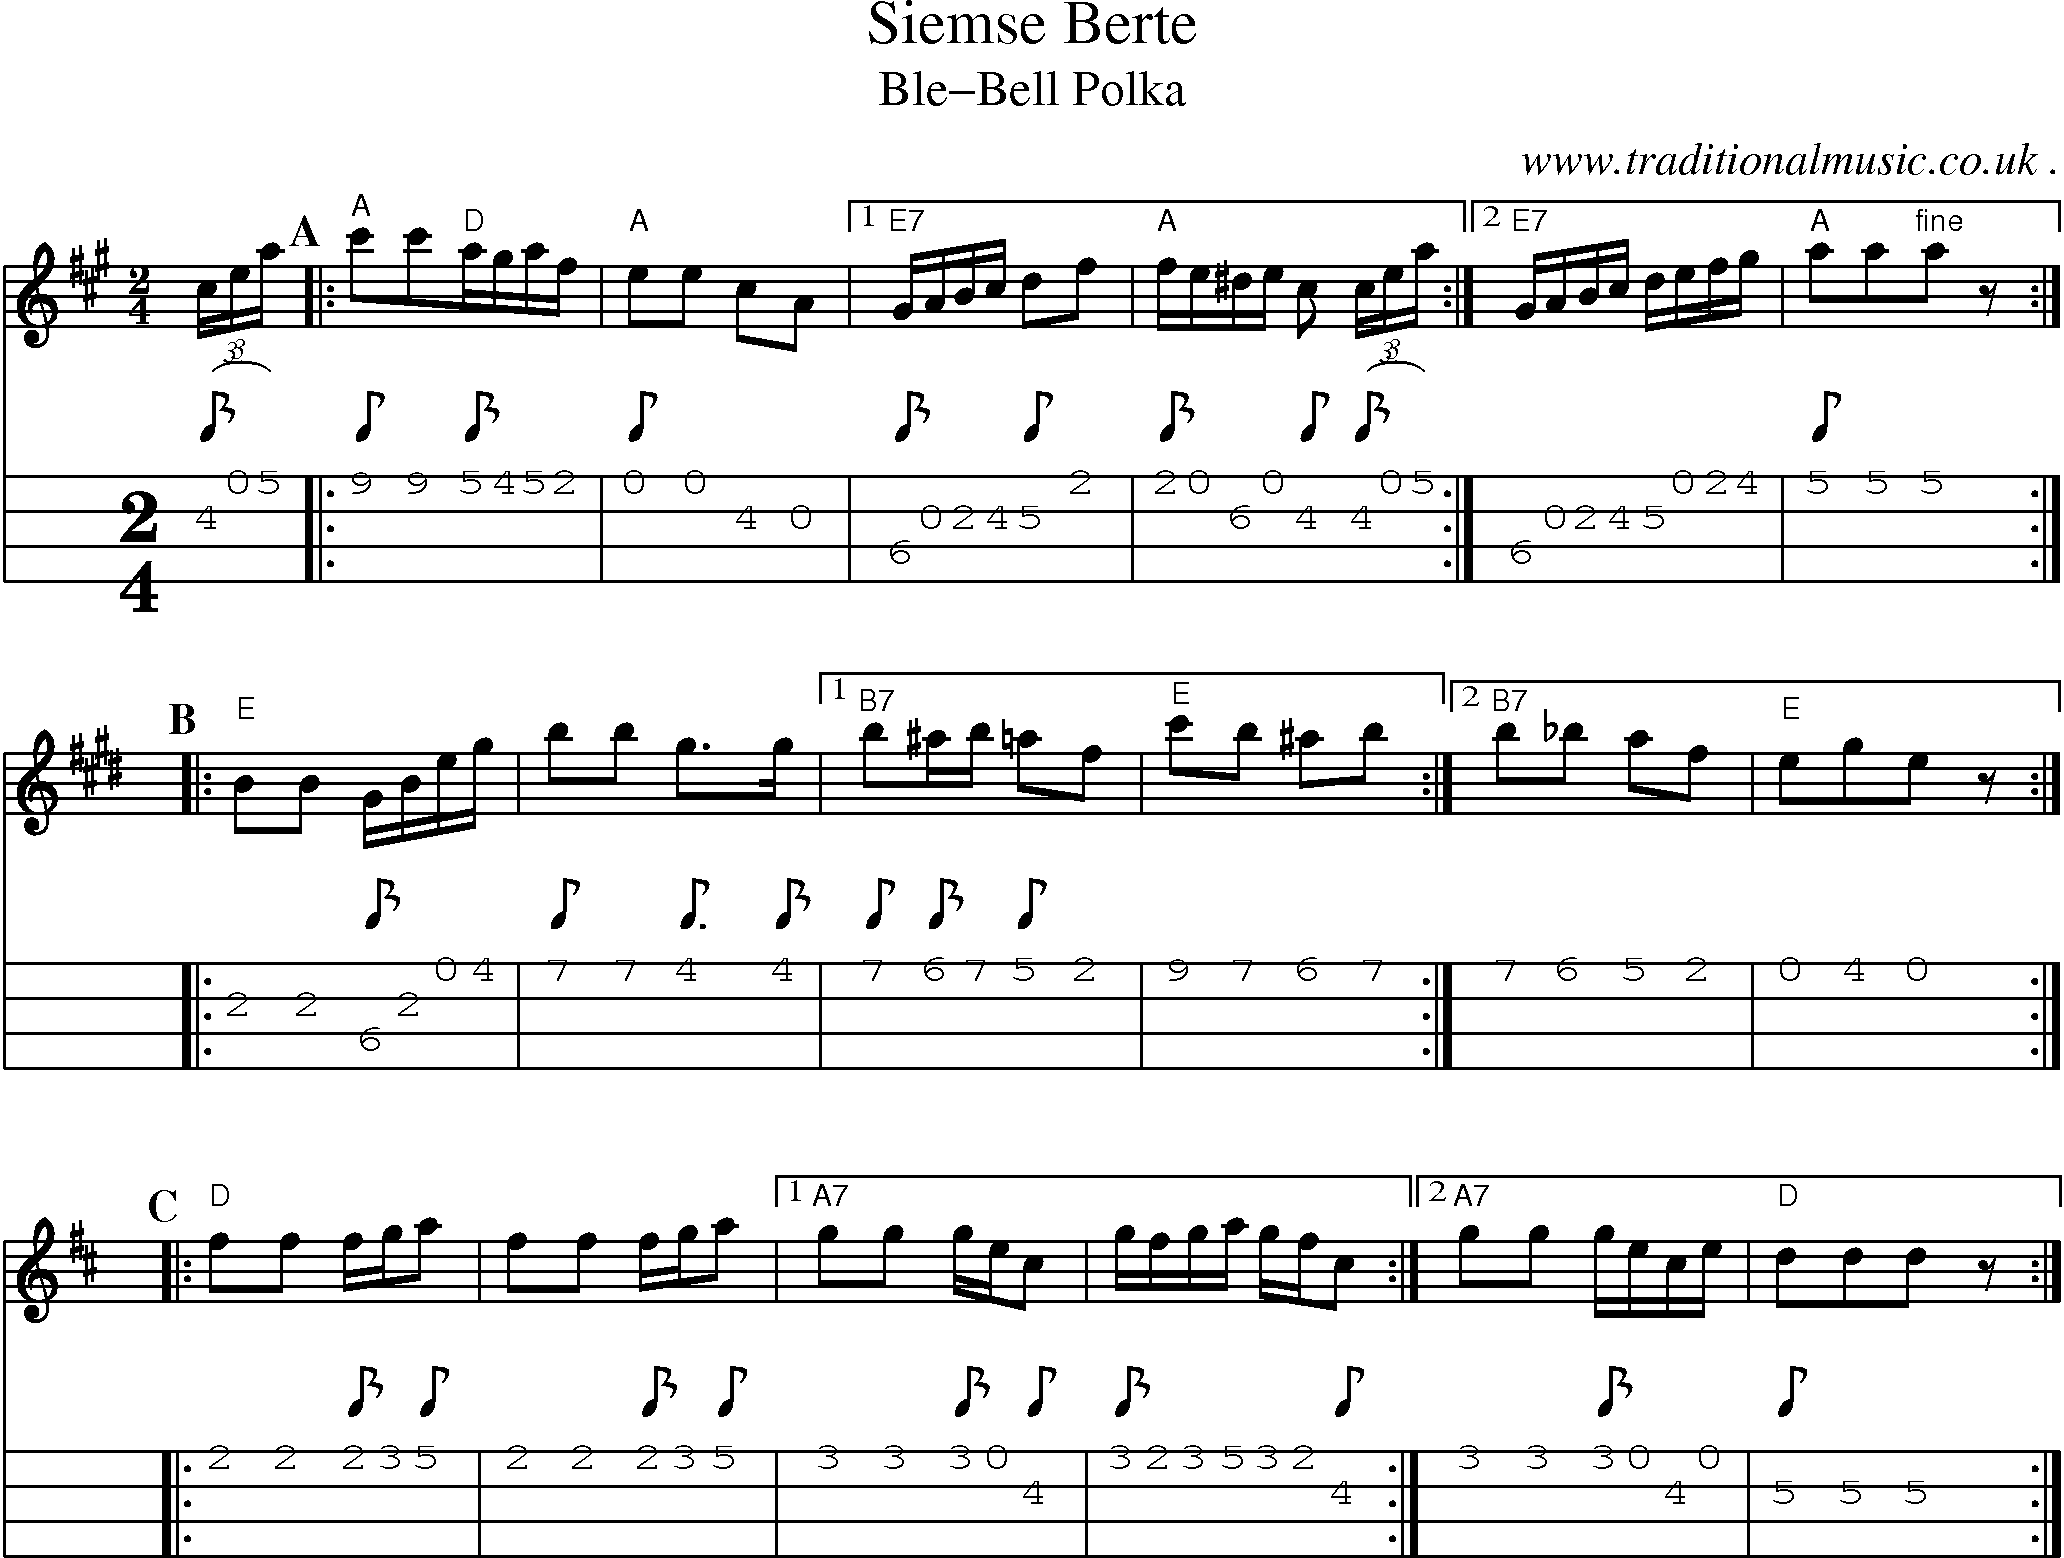 Sheet-Music and Mandolin Tabs for Siemse Berte